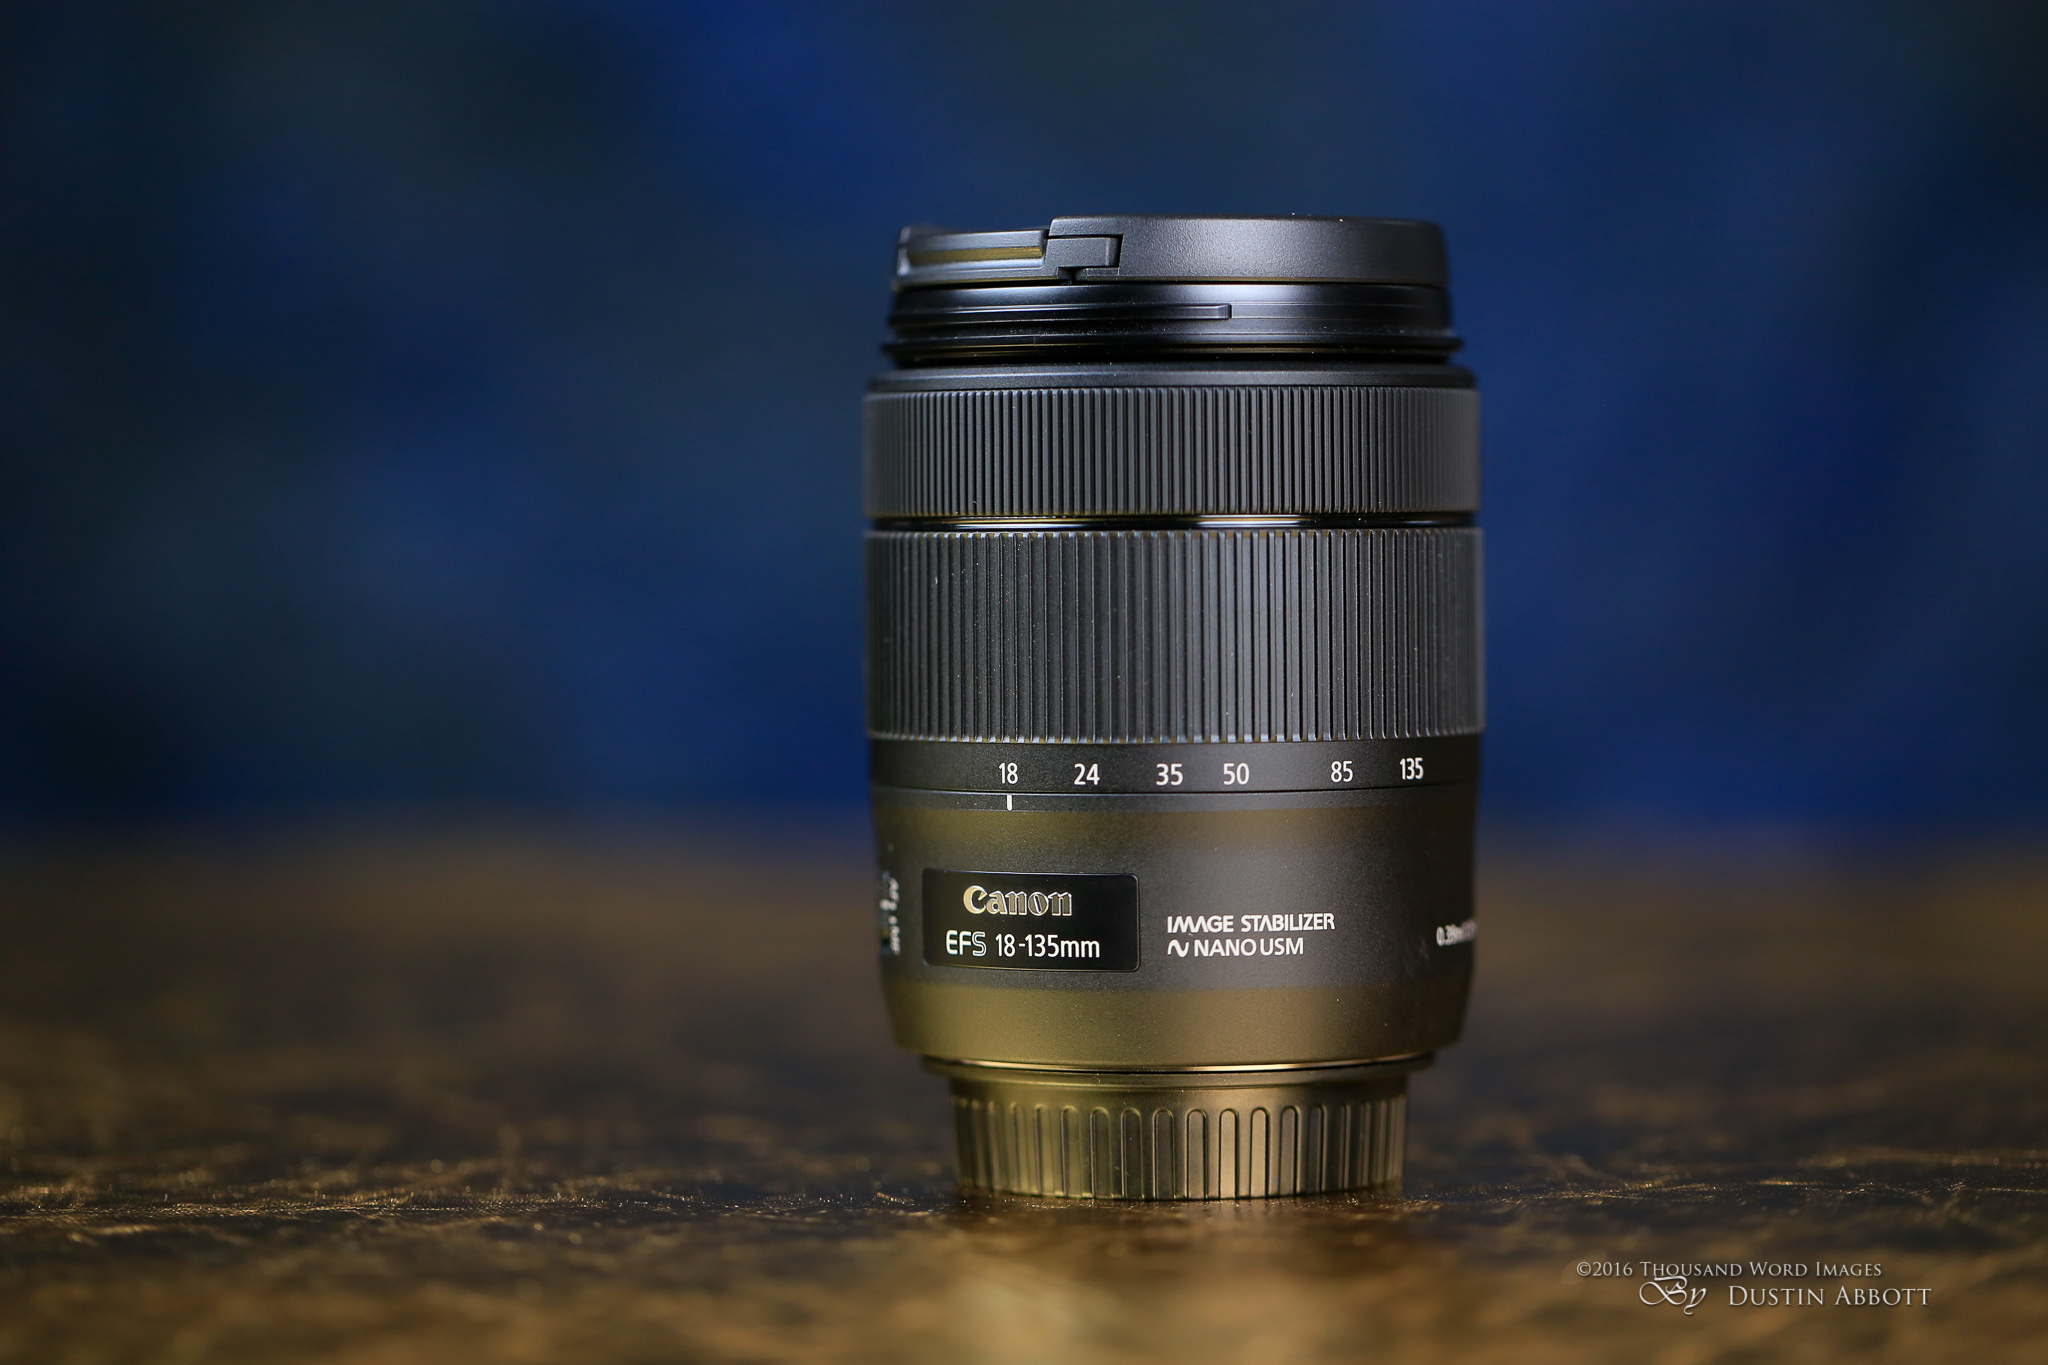 Canon EF-S 18-135mm f/3.5-5.6 IS USM Review - DustinAbbott.net